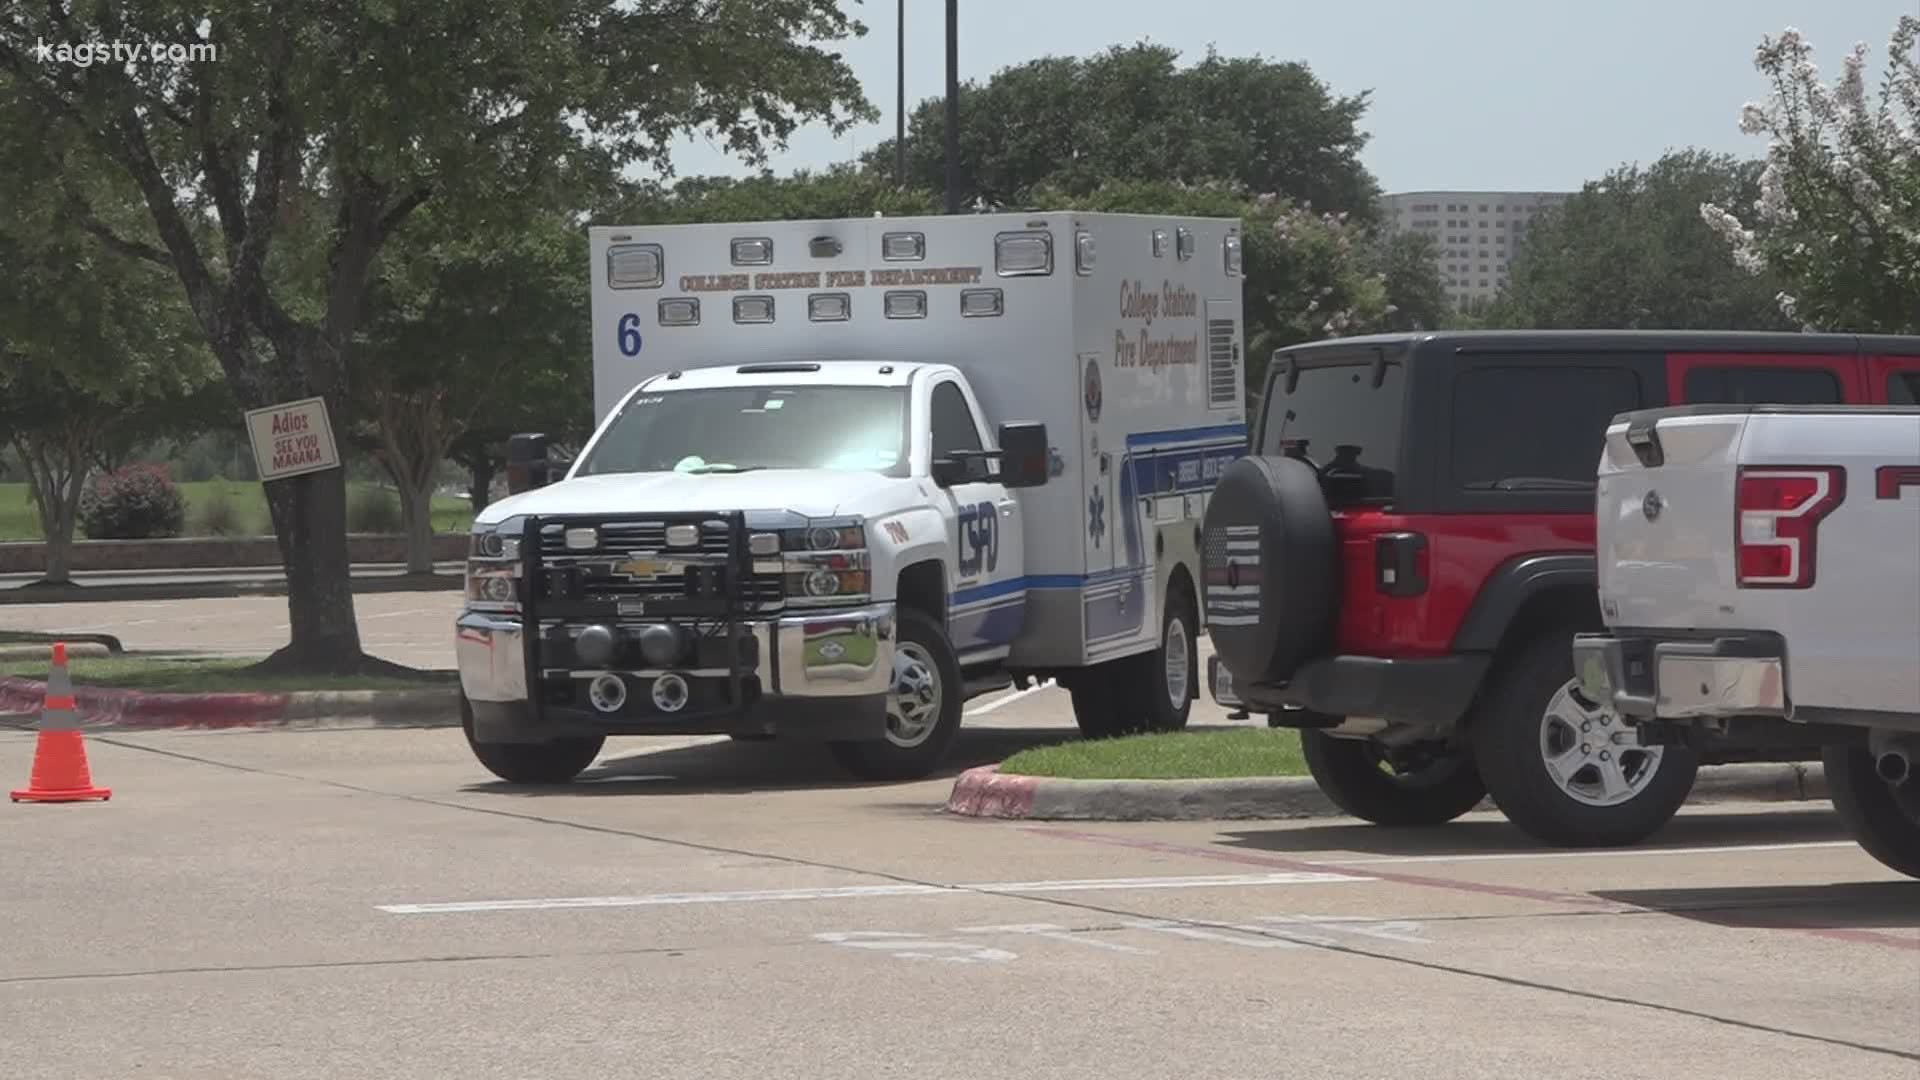 College Station police investigate suspicious package